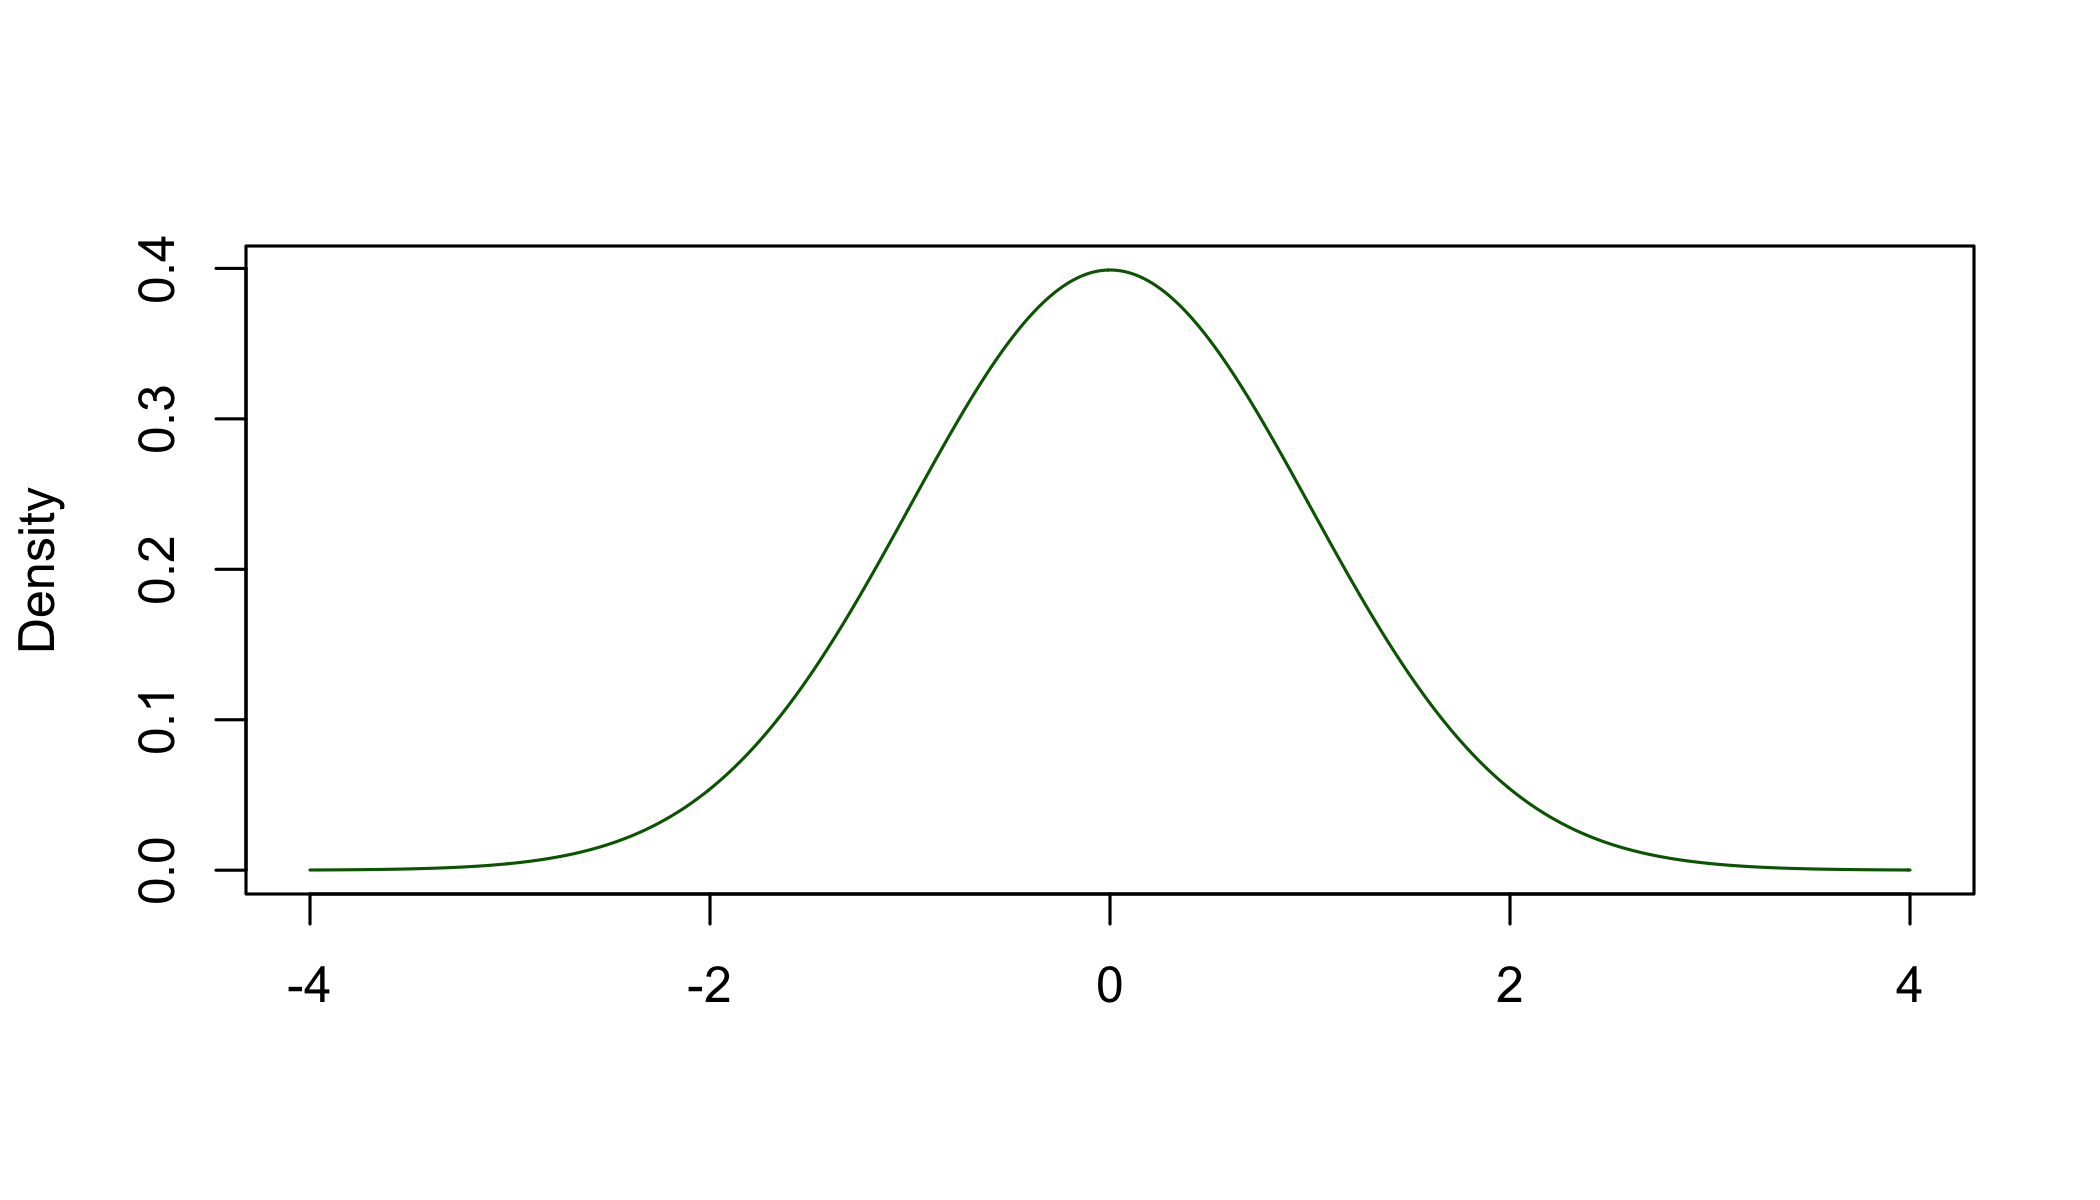 The normal distribution